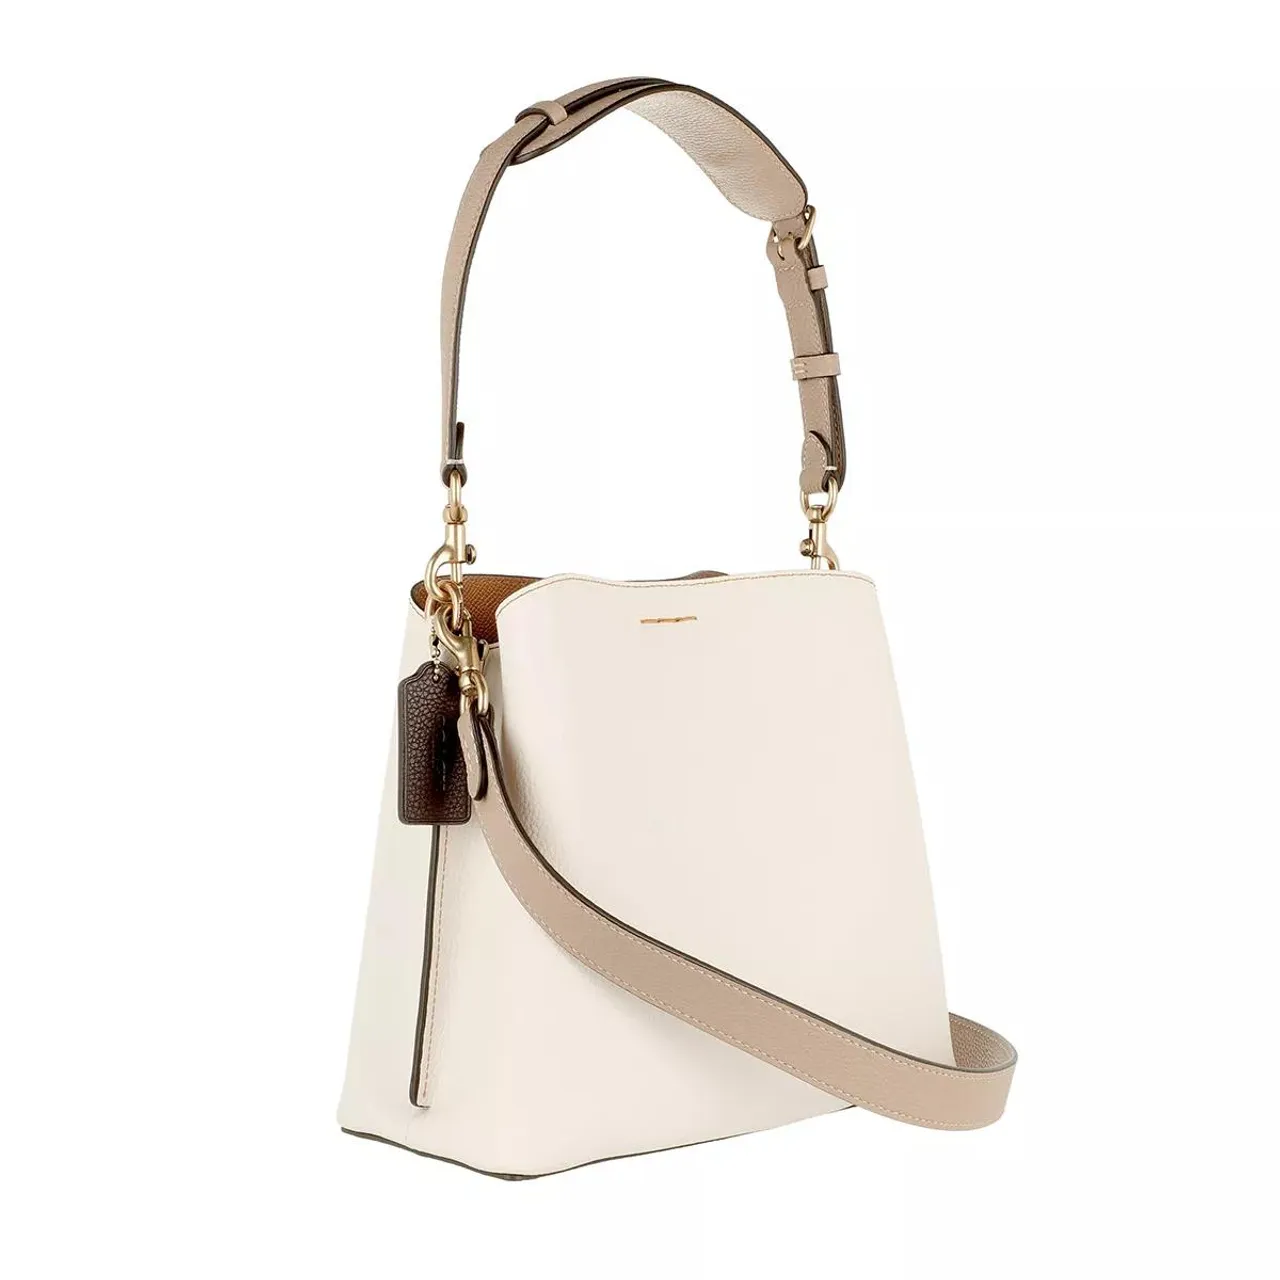 Coach Bucket Bags - Colorblock Leather Willow Bucket - creme - Bucket Bags for ladies